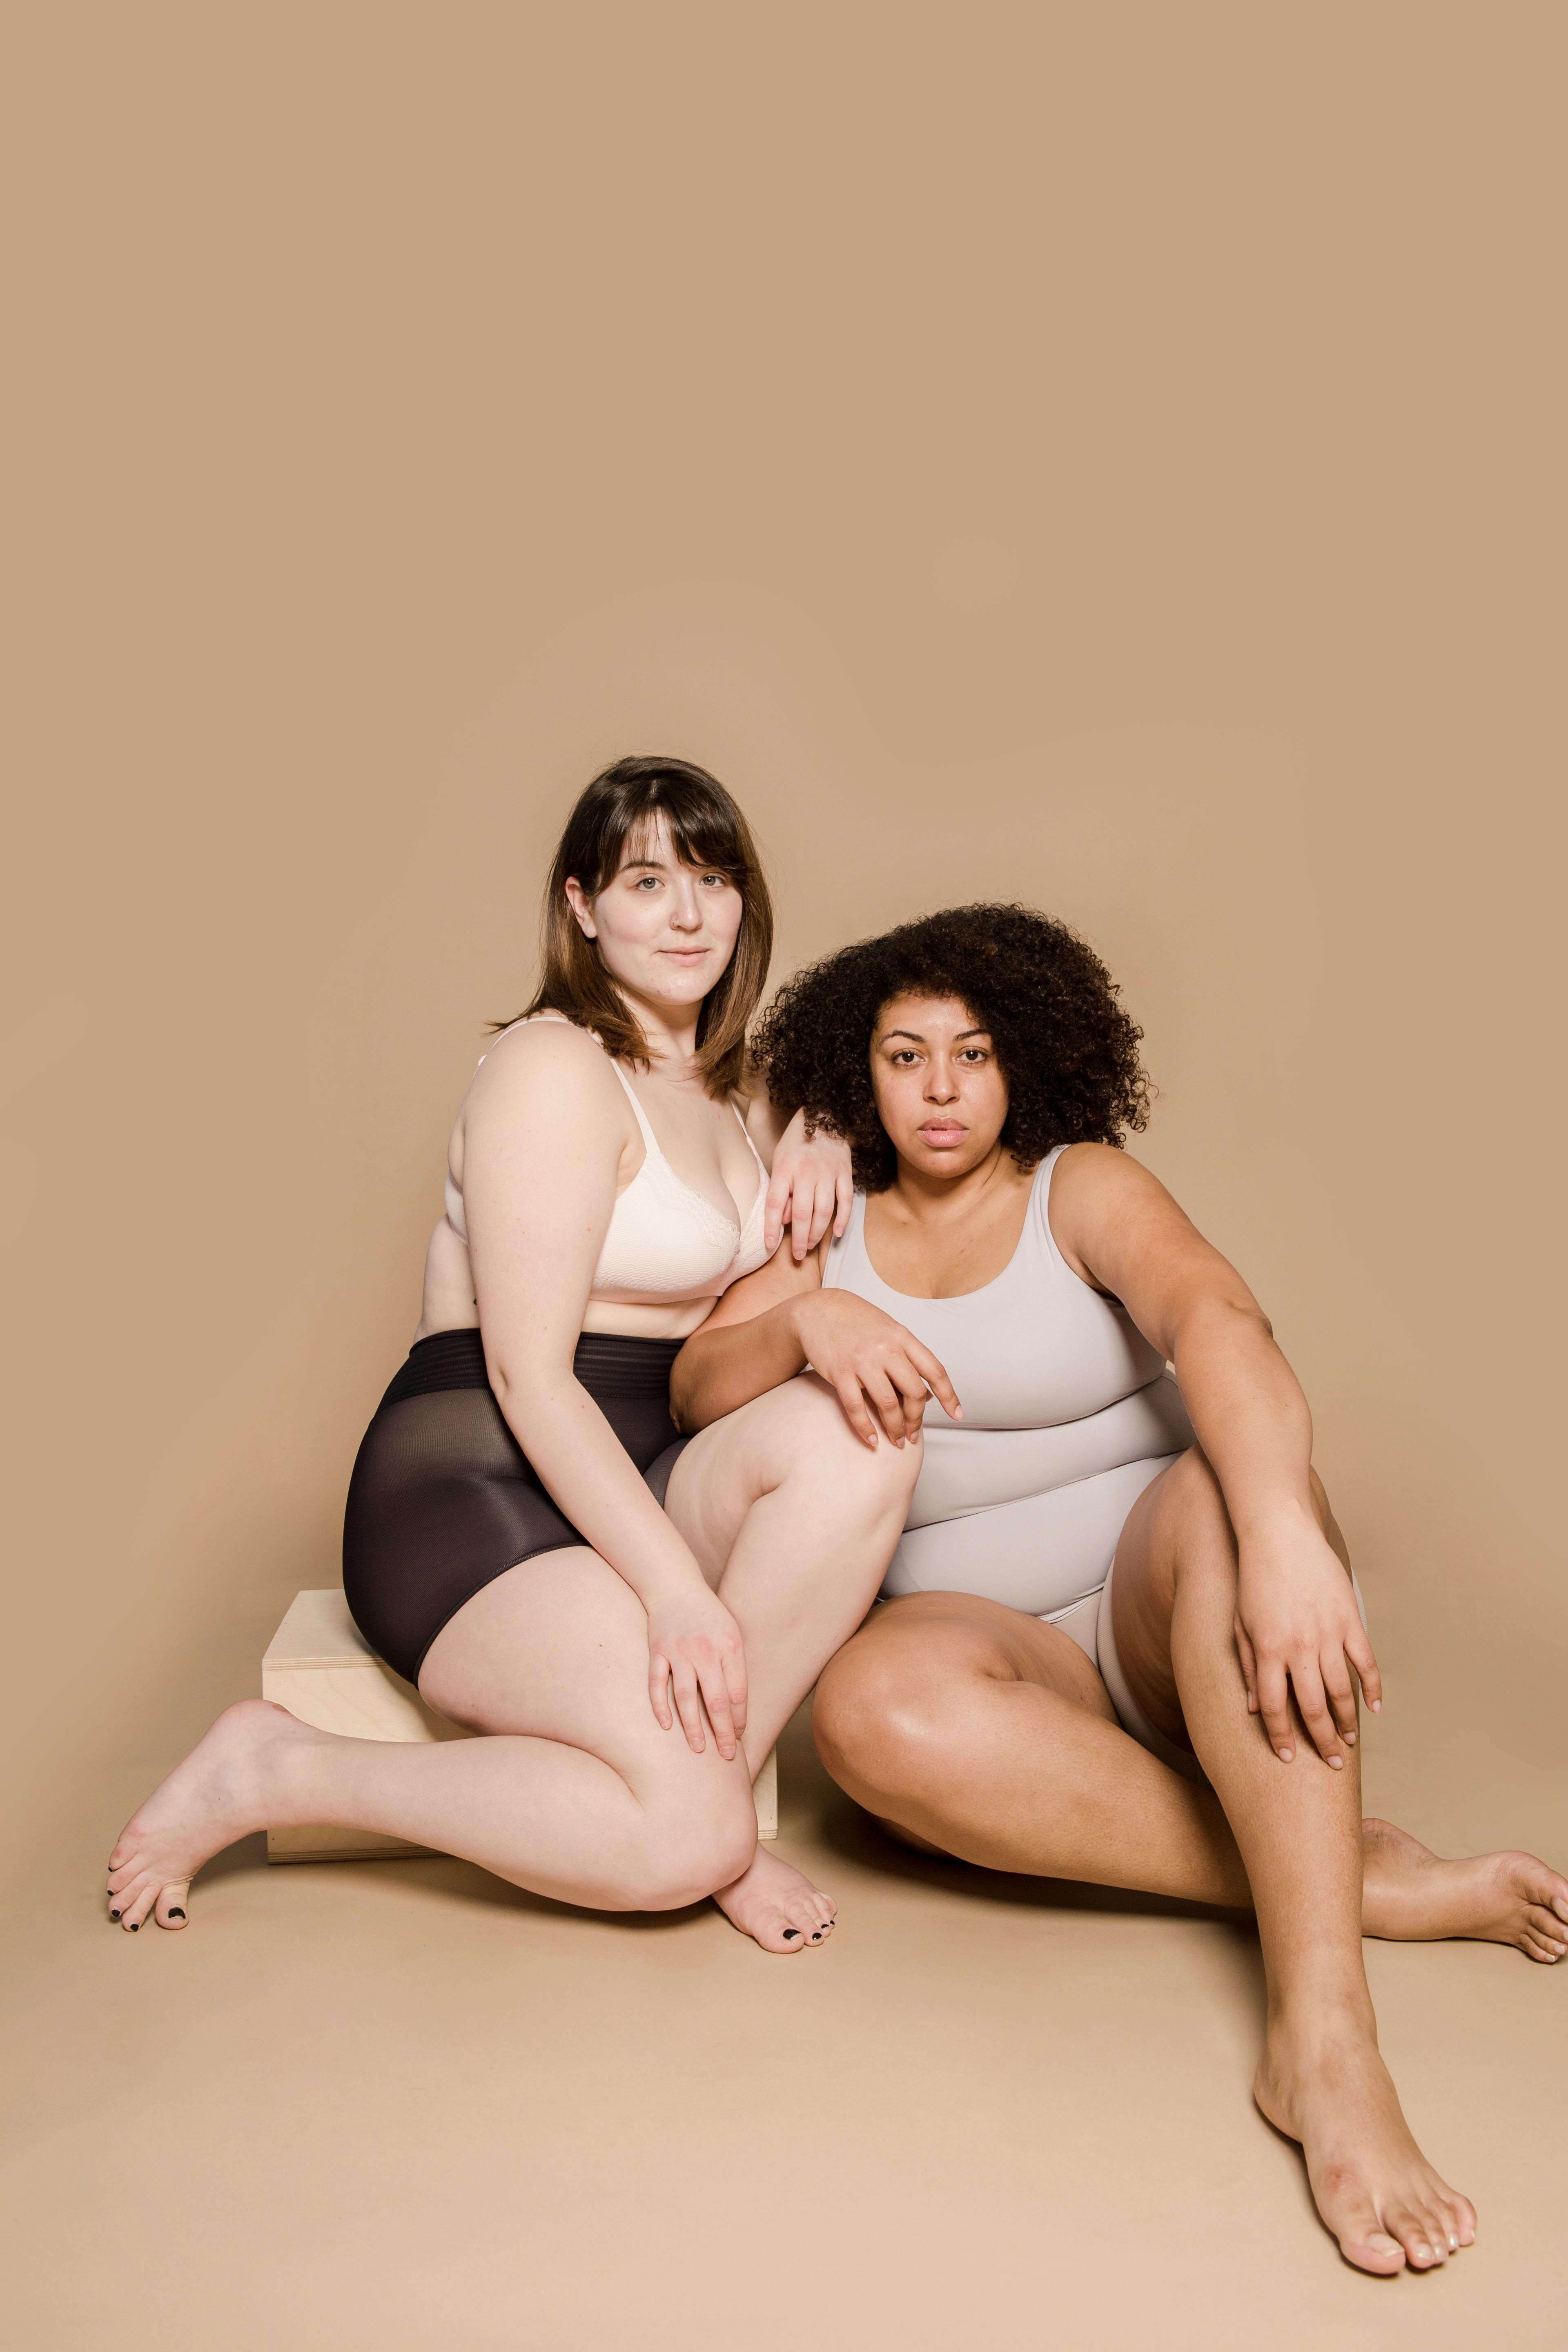 Plus size multiracial models in underwear · Free Stock Photo